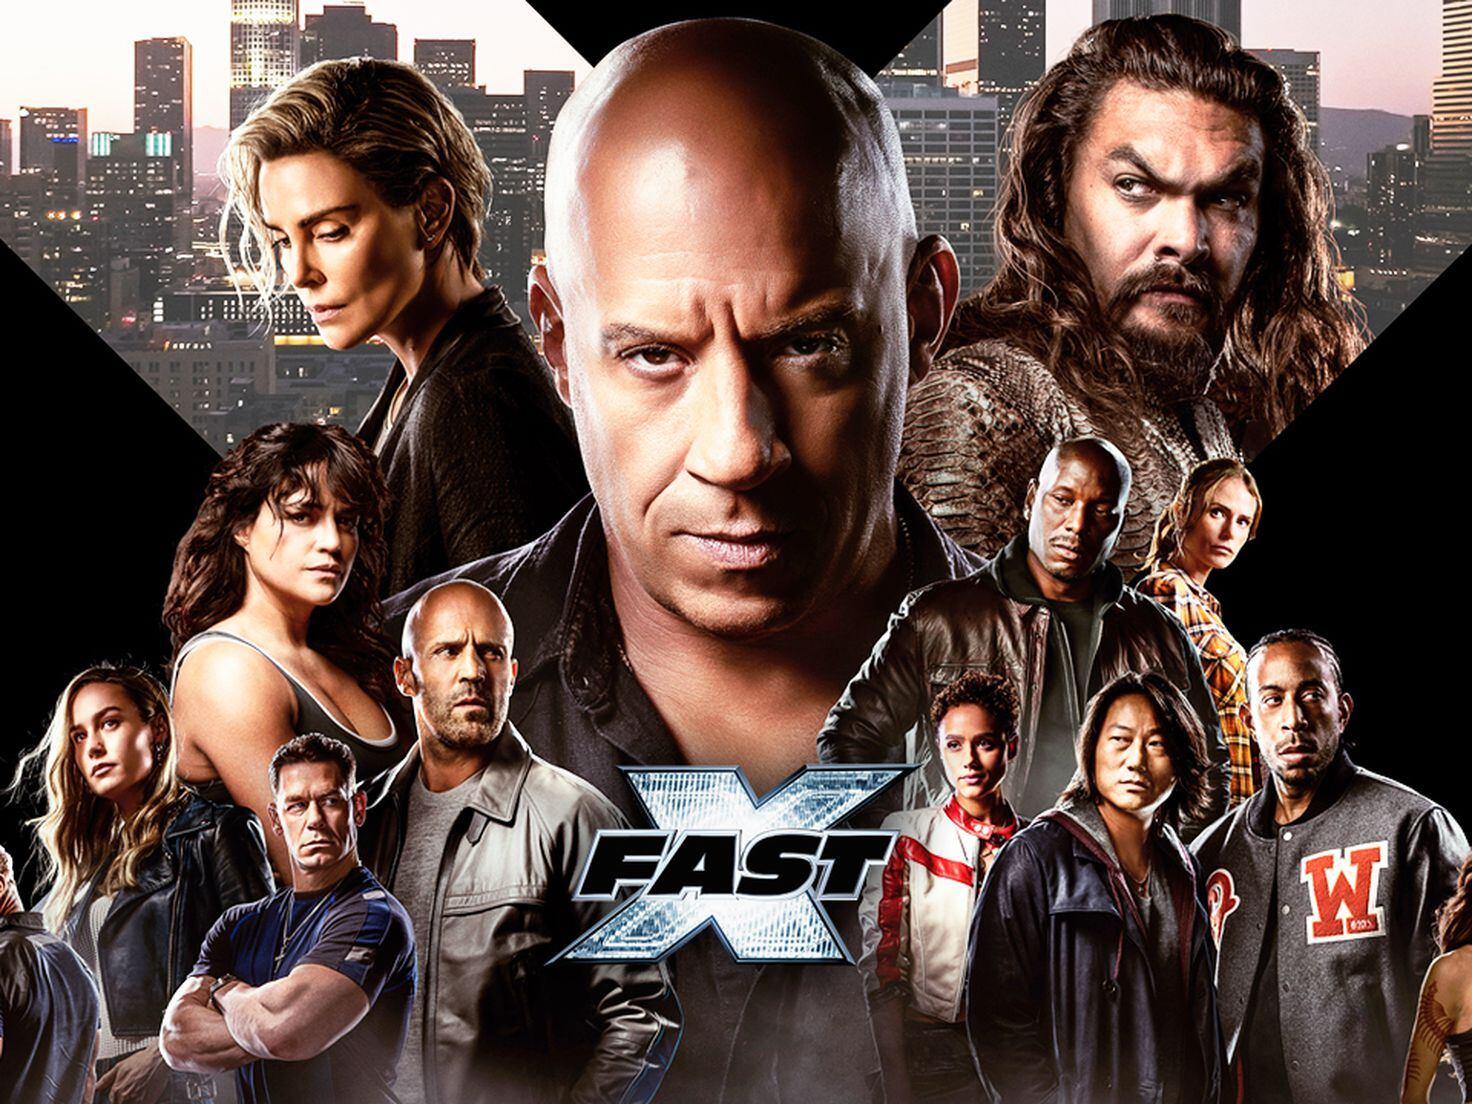 Fast X' pulls in $28 million in Thursday and Friday screenings - AS USA